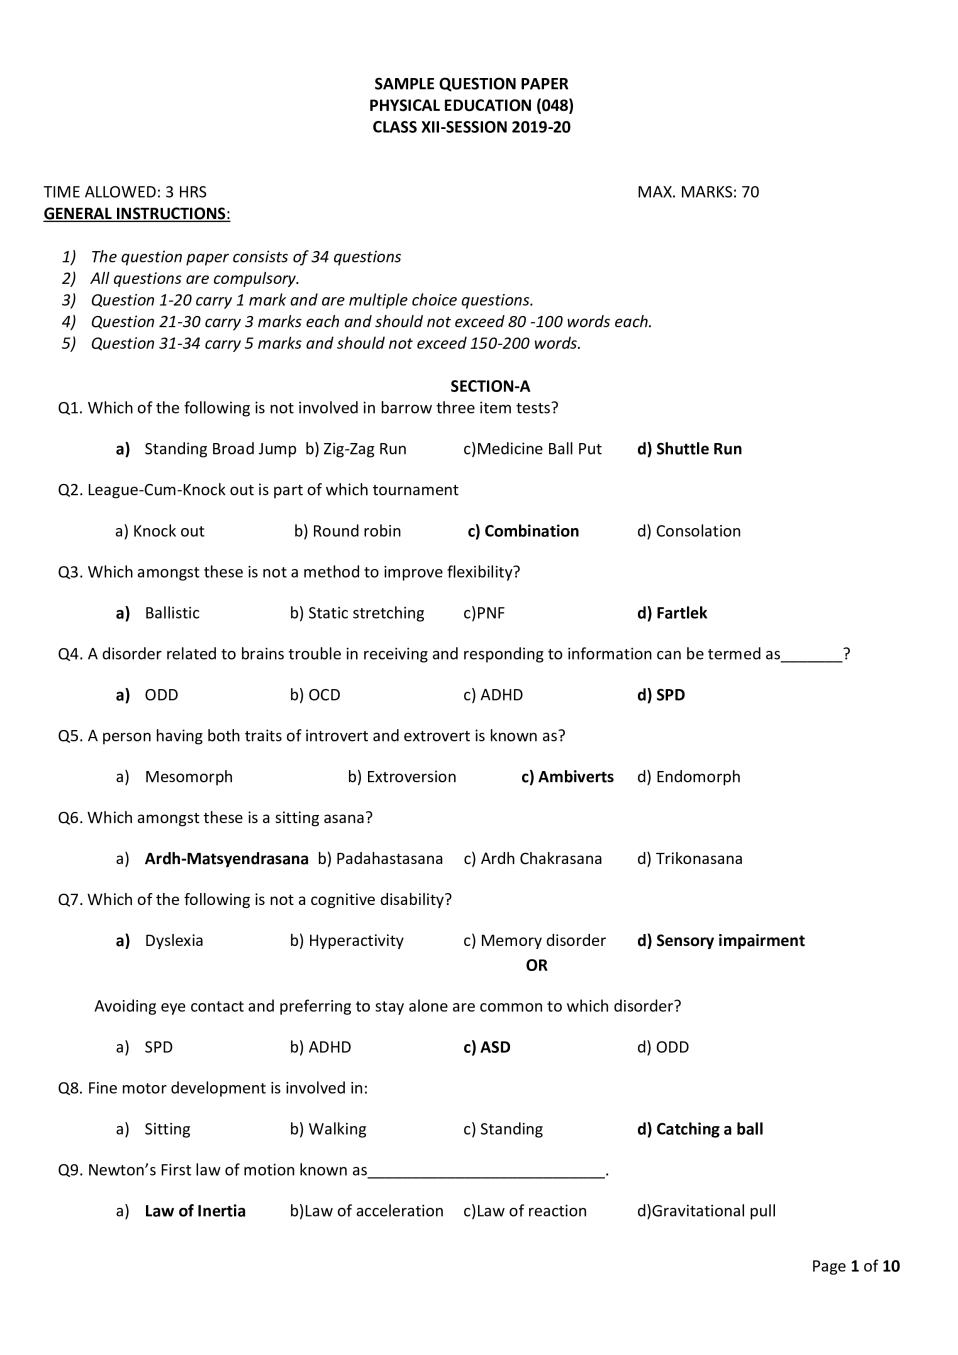 CBSE Class 12 Sample Paper 2020 for Physical Education - Page 1